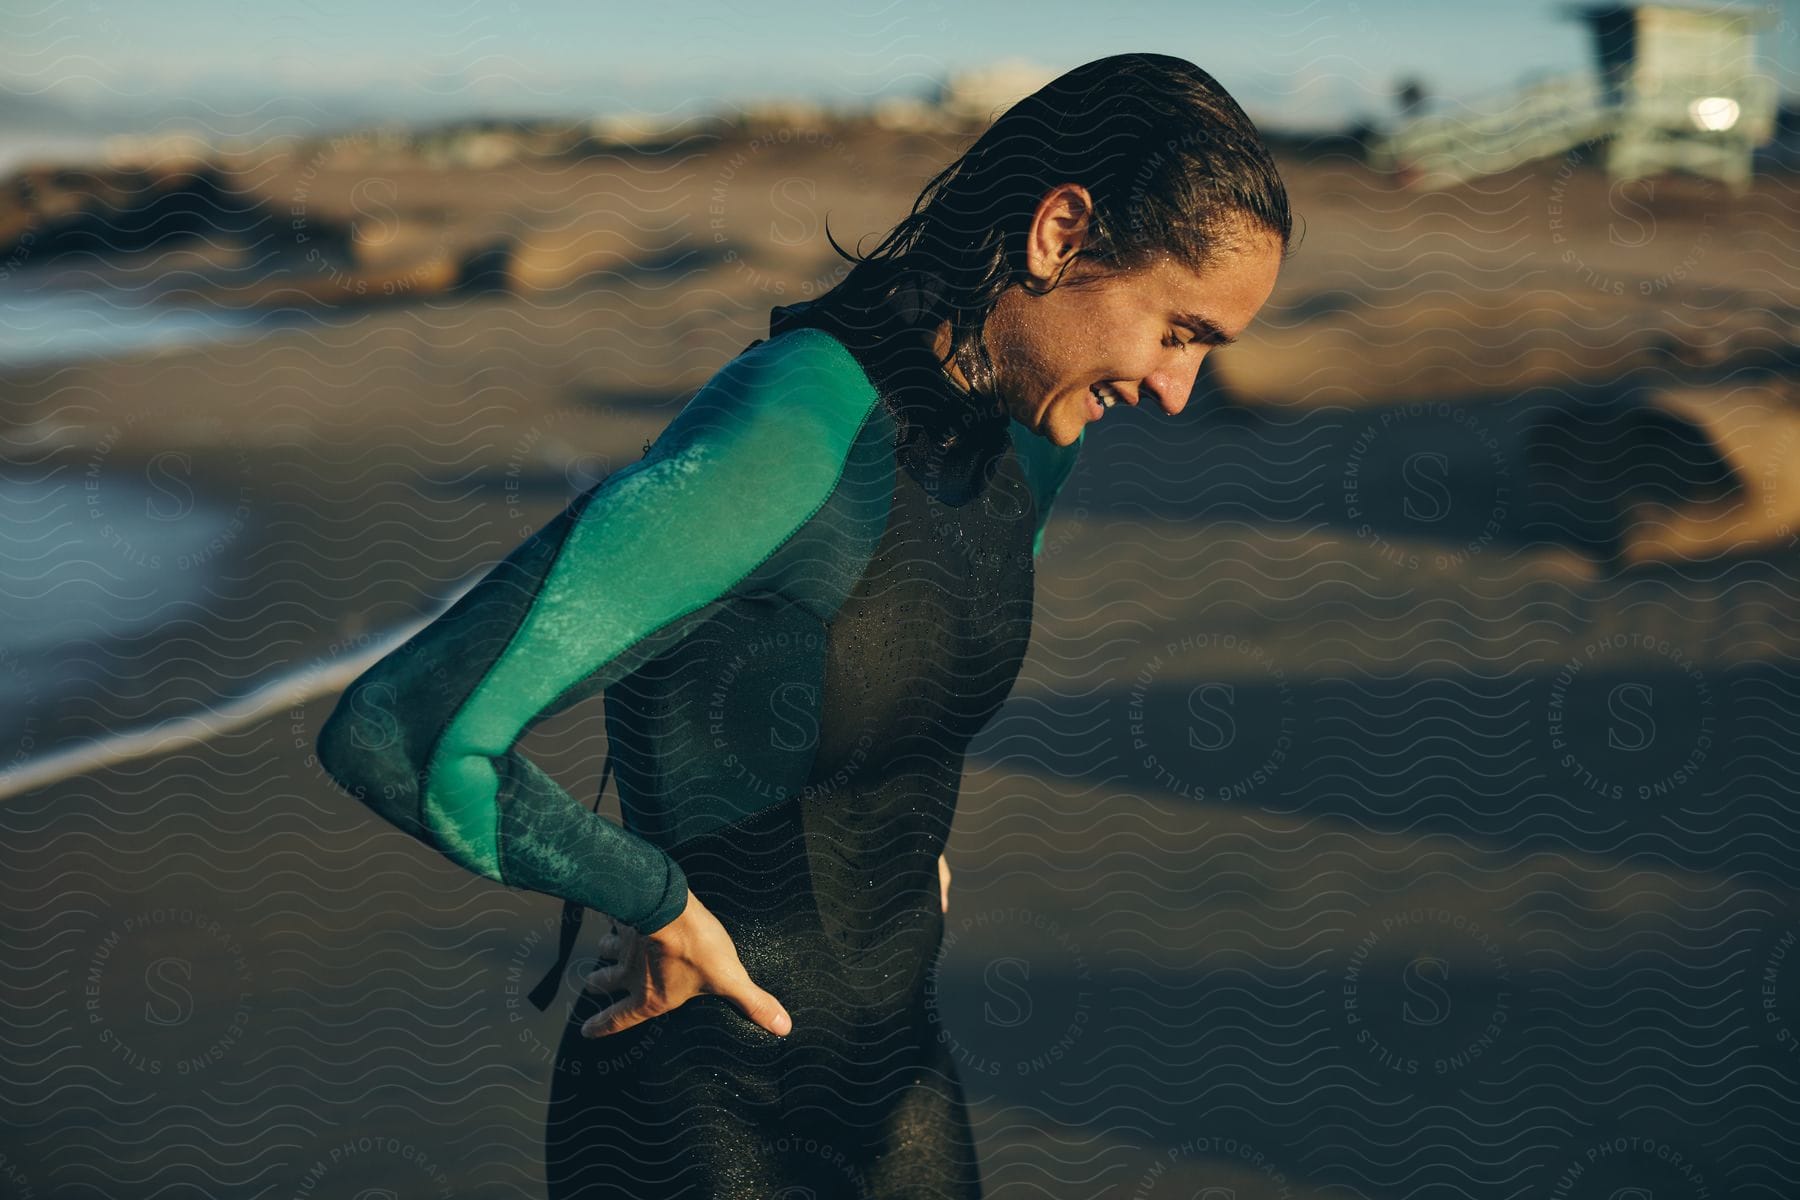 A woman smiles on the beach wearing a wet suit